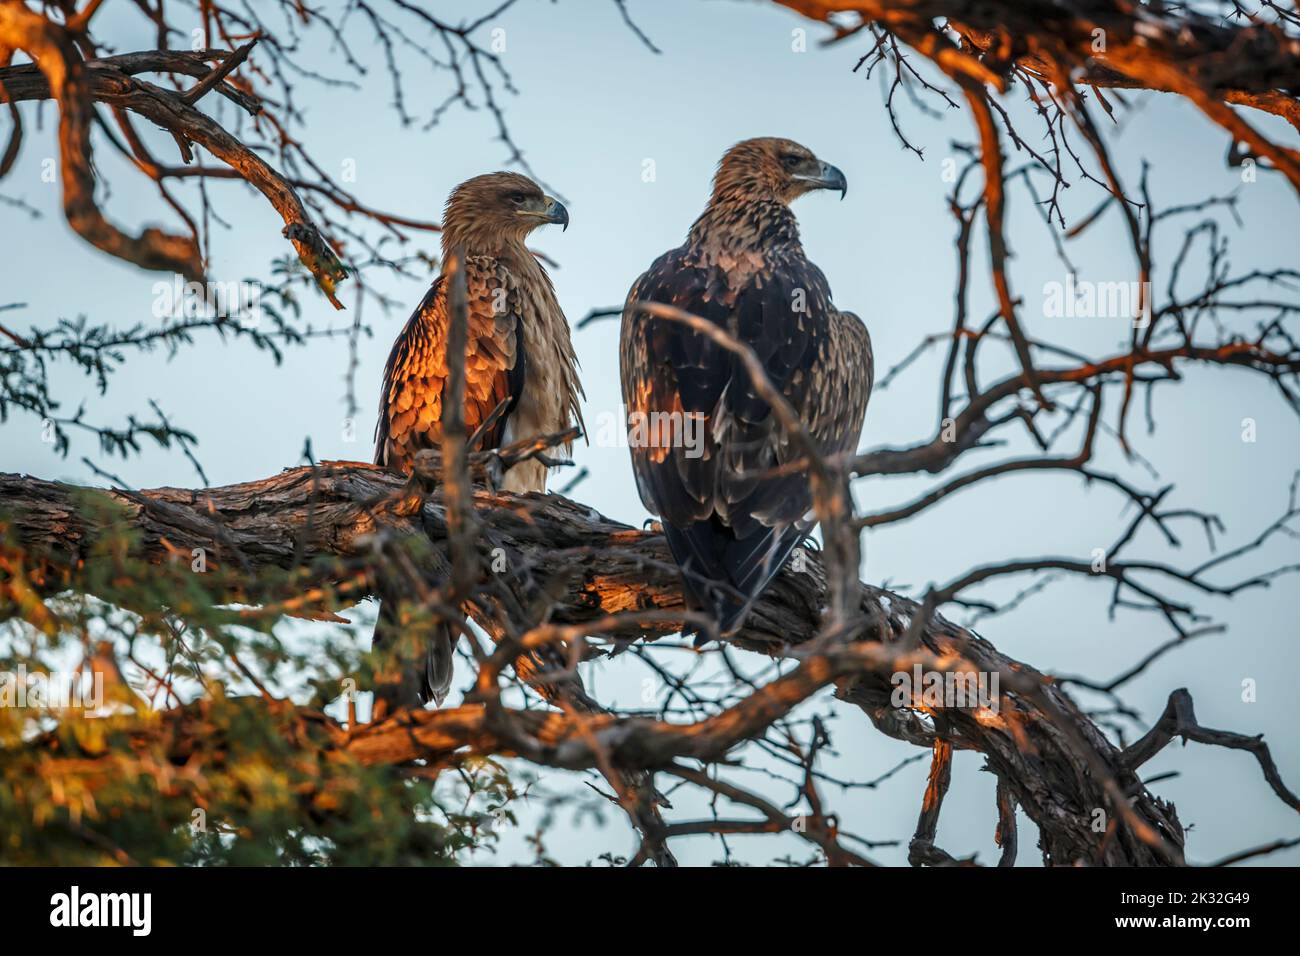 Two Tawny Eagle adult and juvenile in a tree in Kgalagadi transfrontier park, South Africa ; Specie Aquila rapax family of Accipitridae Stock Photo